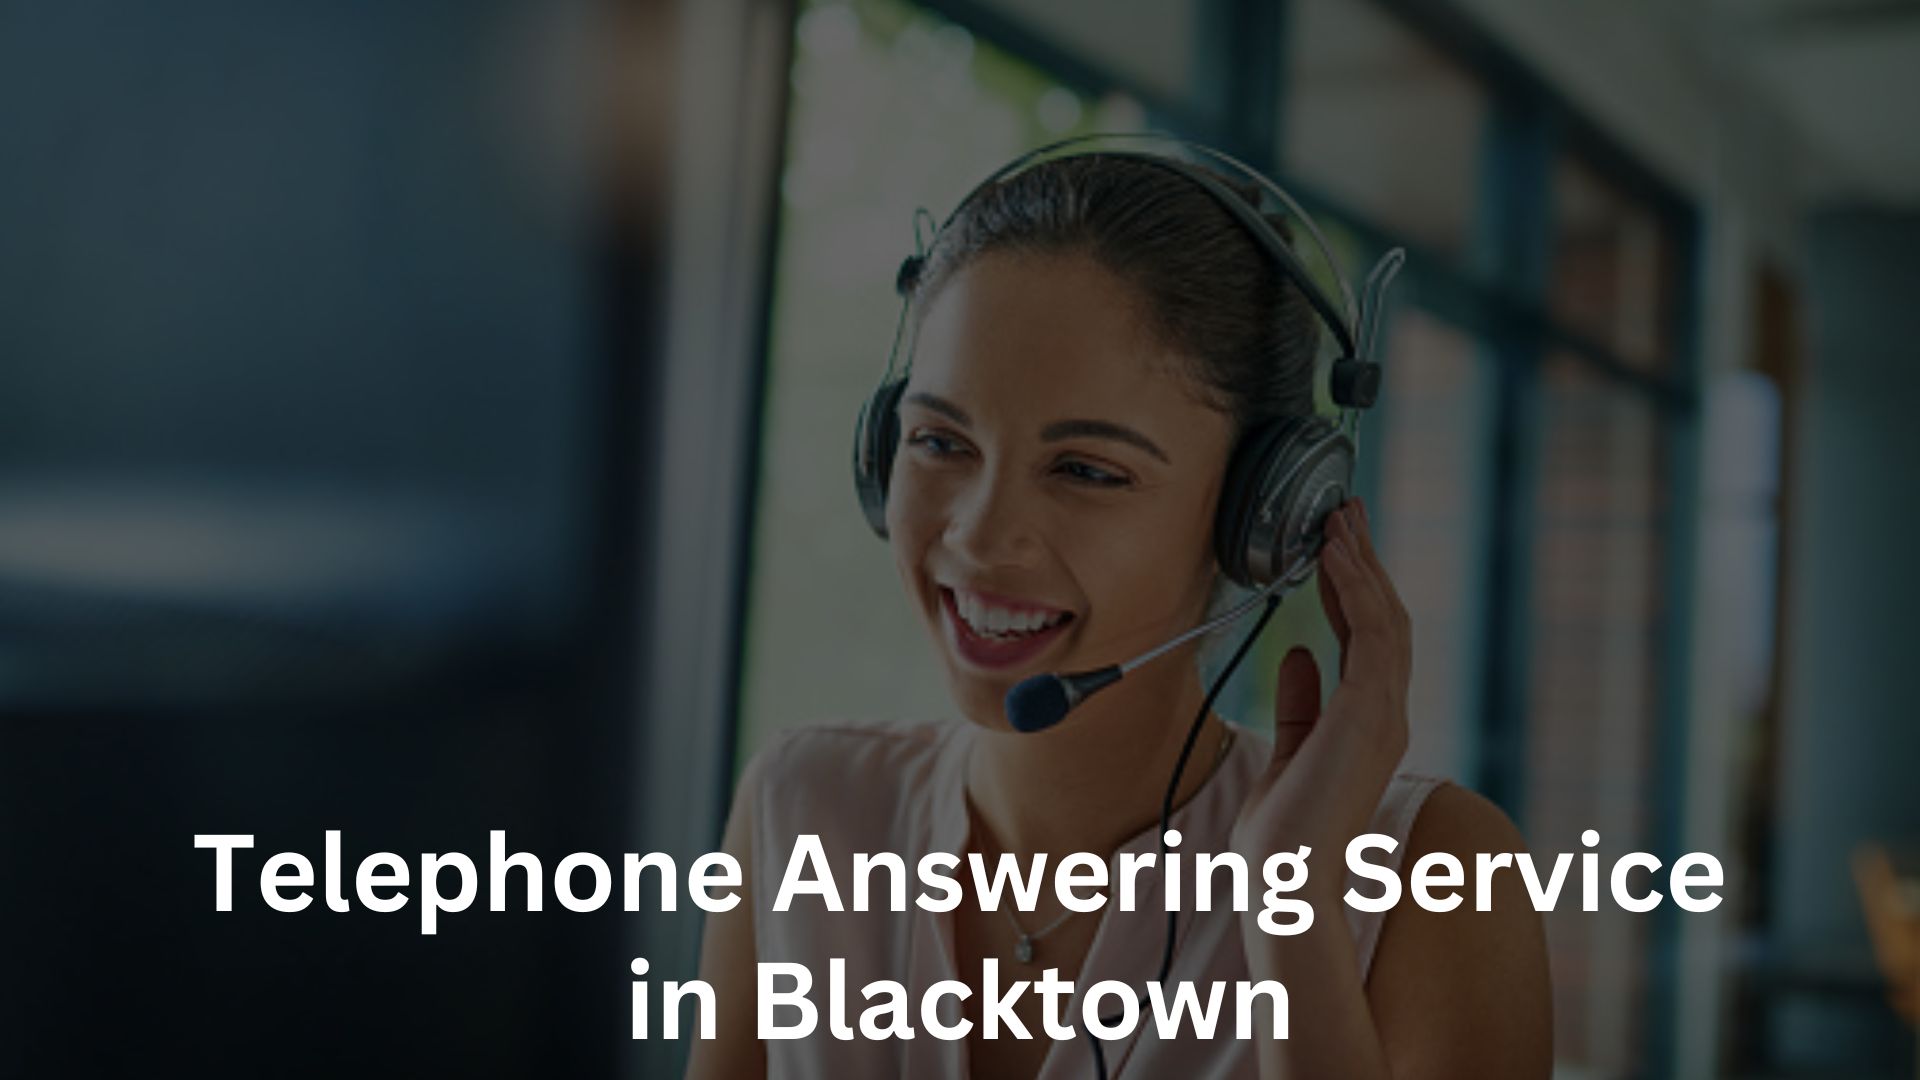 Telephone Answering Service in Blacktown